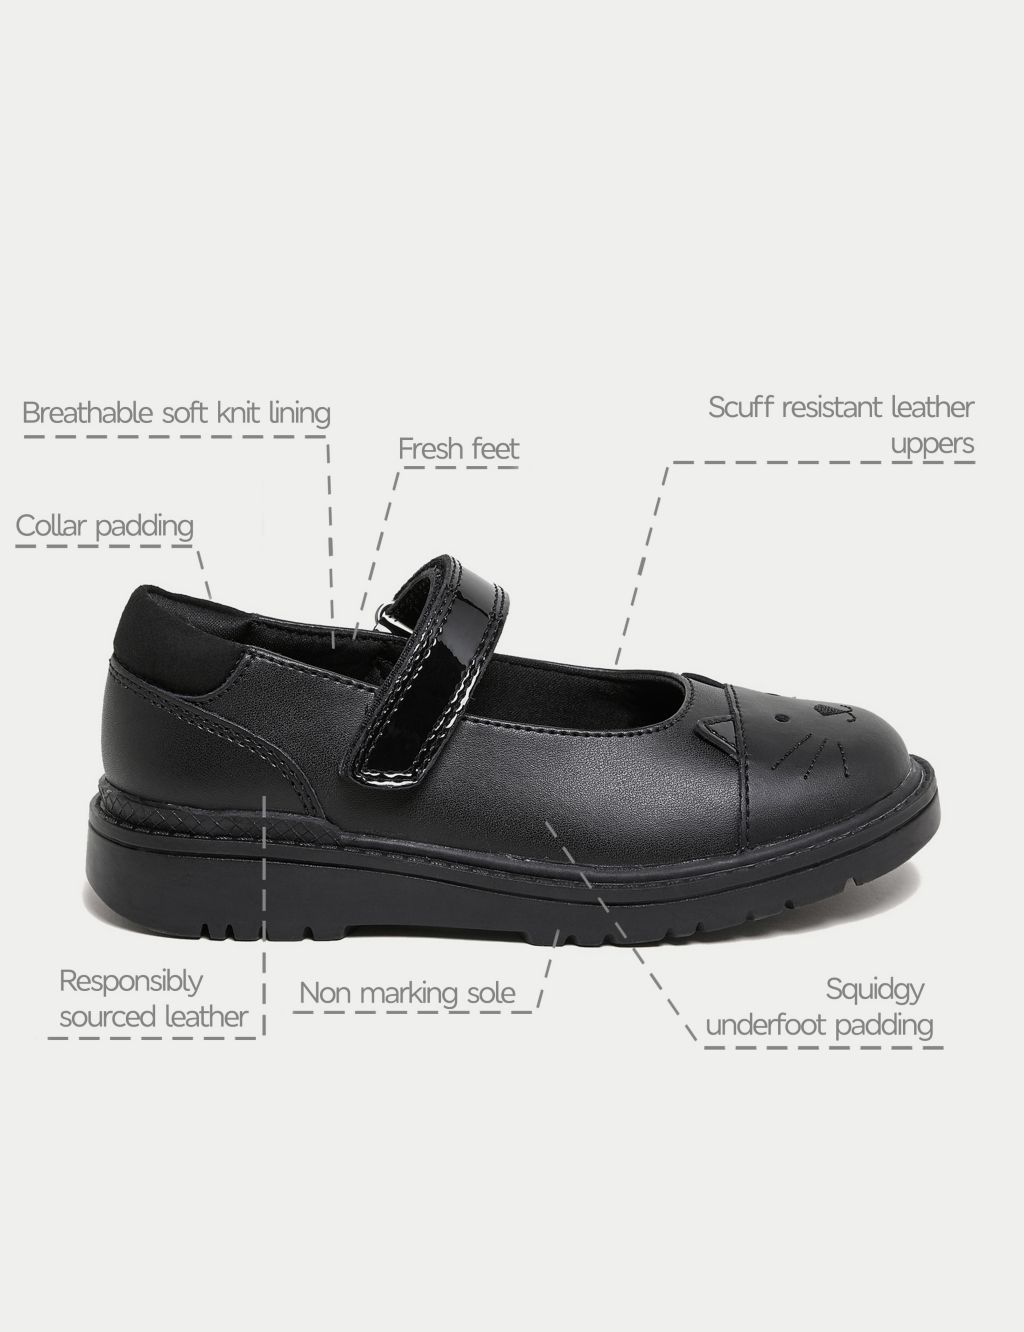 Kids' Leather Mary Jane Cat School Shoes (8 Small - 1 Large) image 4